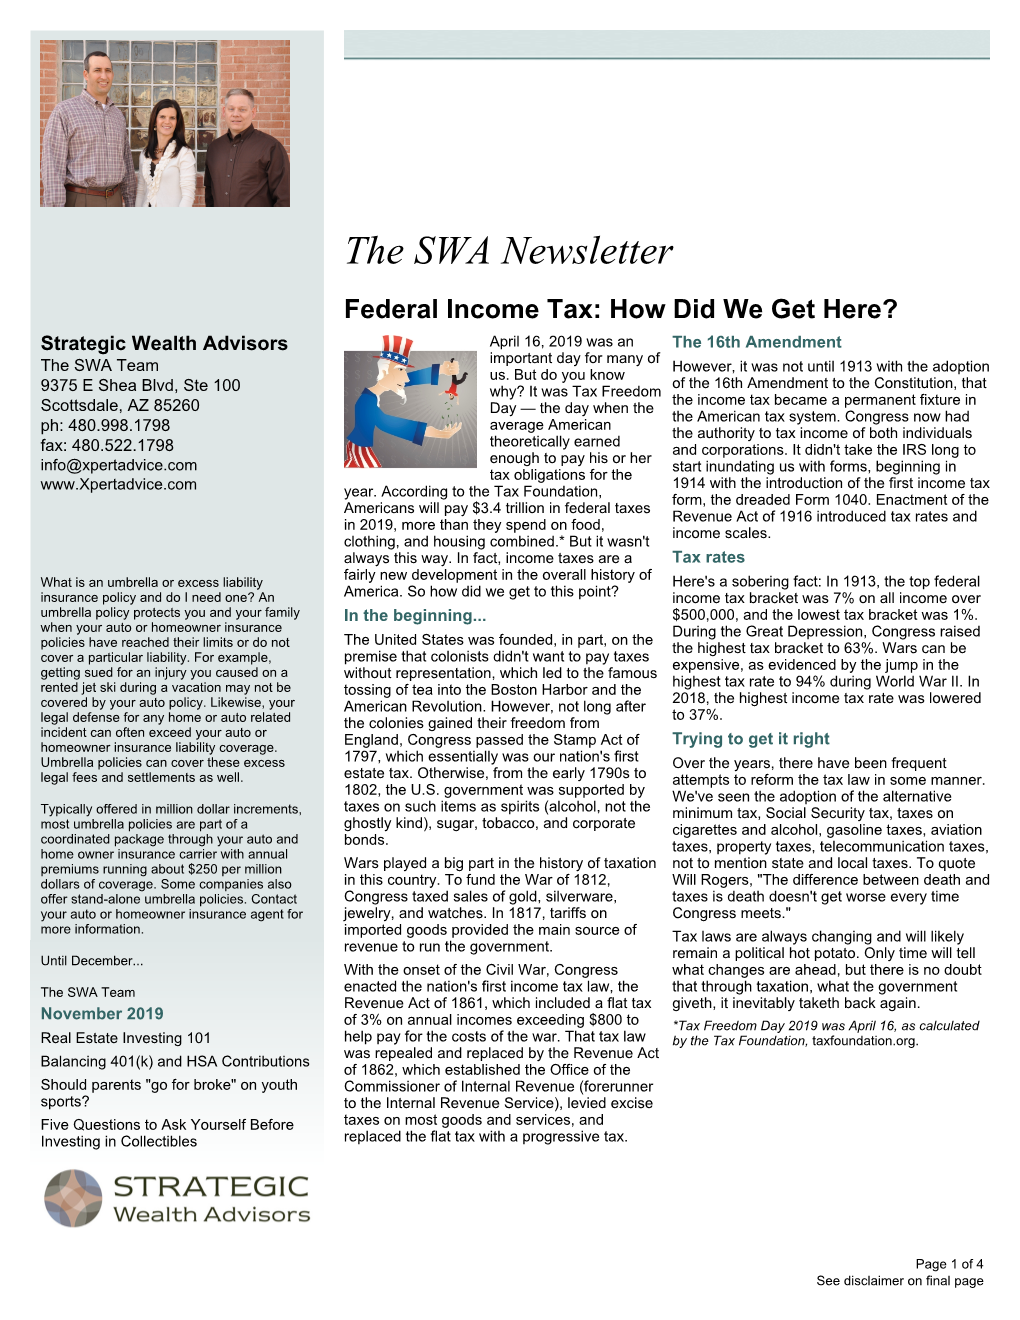 The SWA Newsletter Federal Income